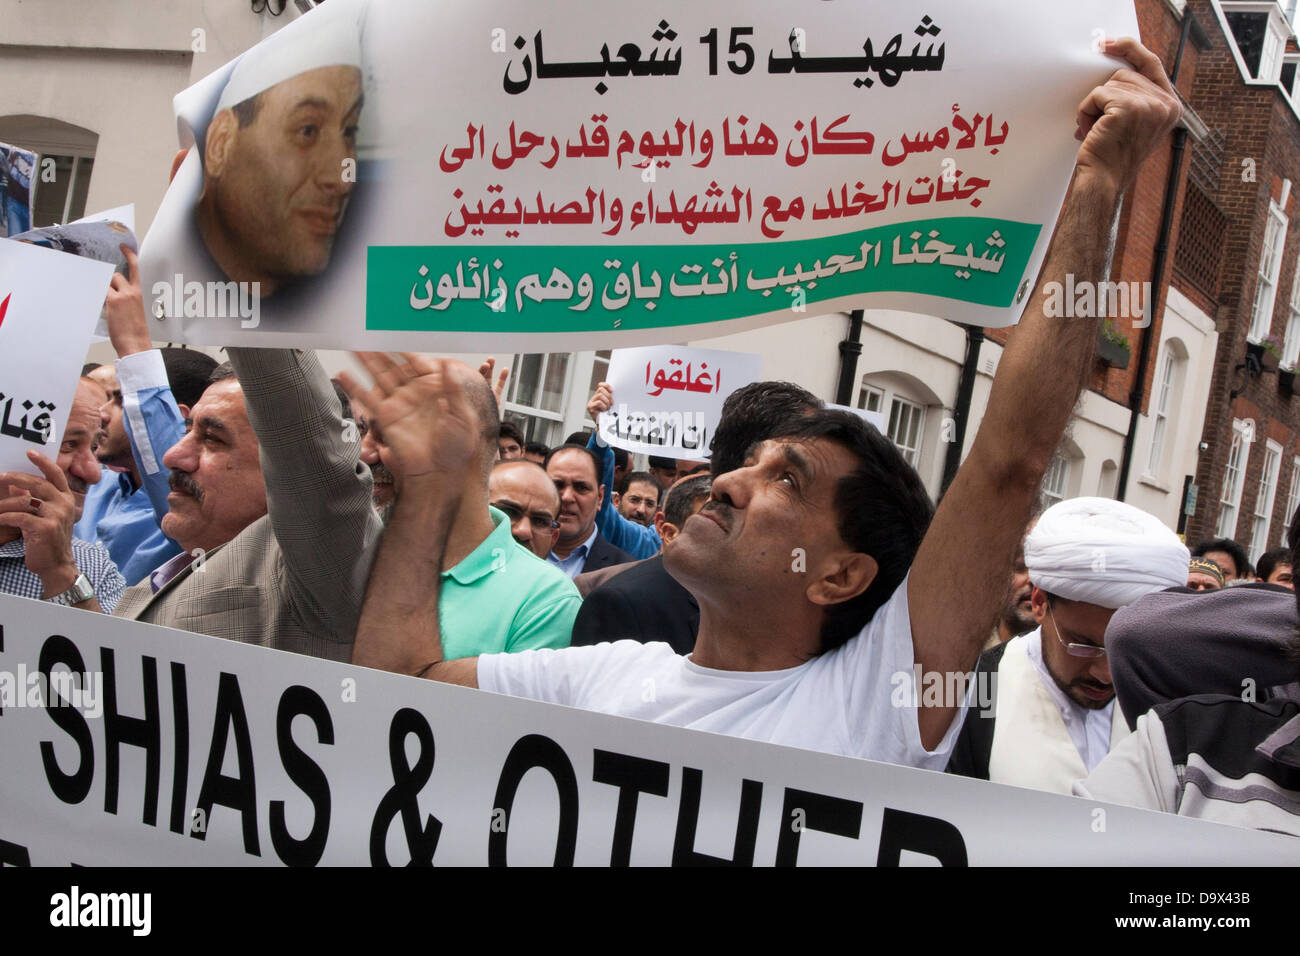 London, UK. 27th June 2013. A demonstrator displays his banner as Egyptians in London protest against sectarian killings in Egypt. Credit:  Paul Davey/Alamy Live News Stock Photo